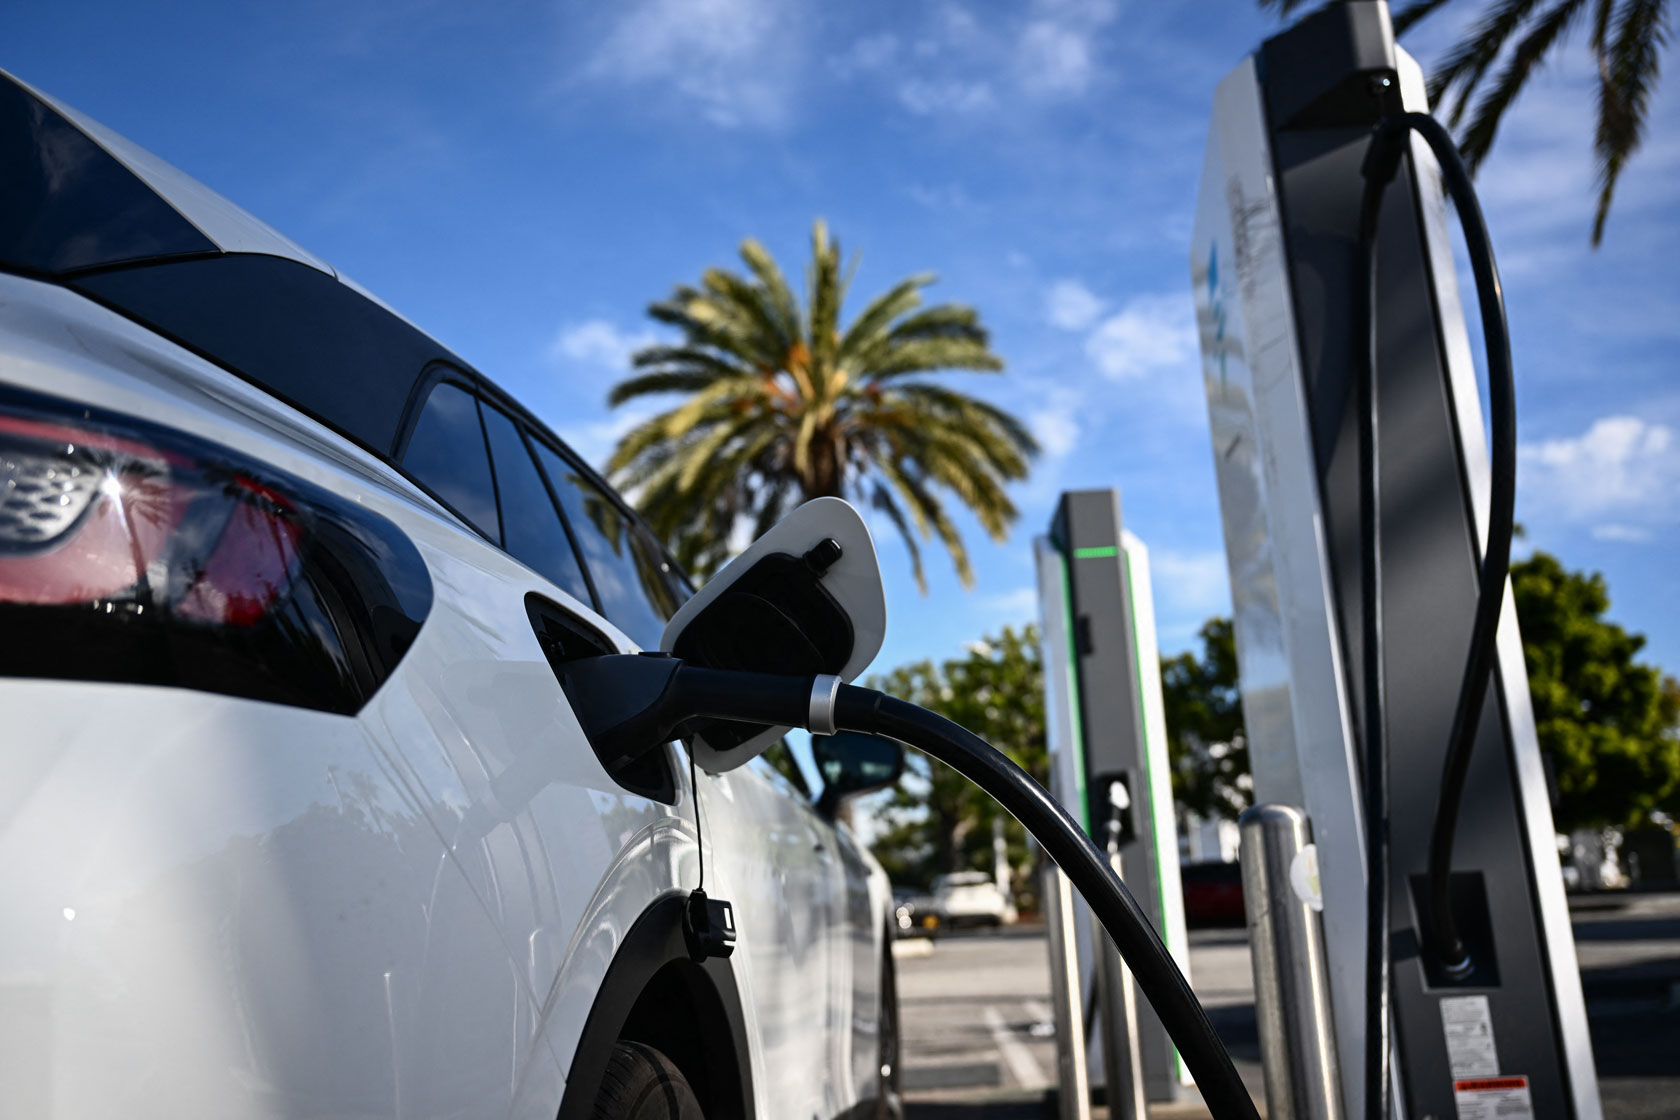 An electric car is plugged into a charging station with a palm tree in the background.